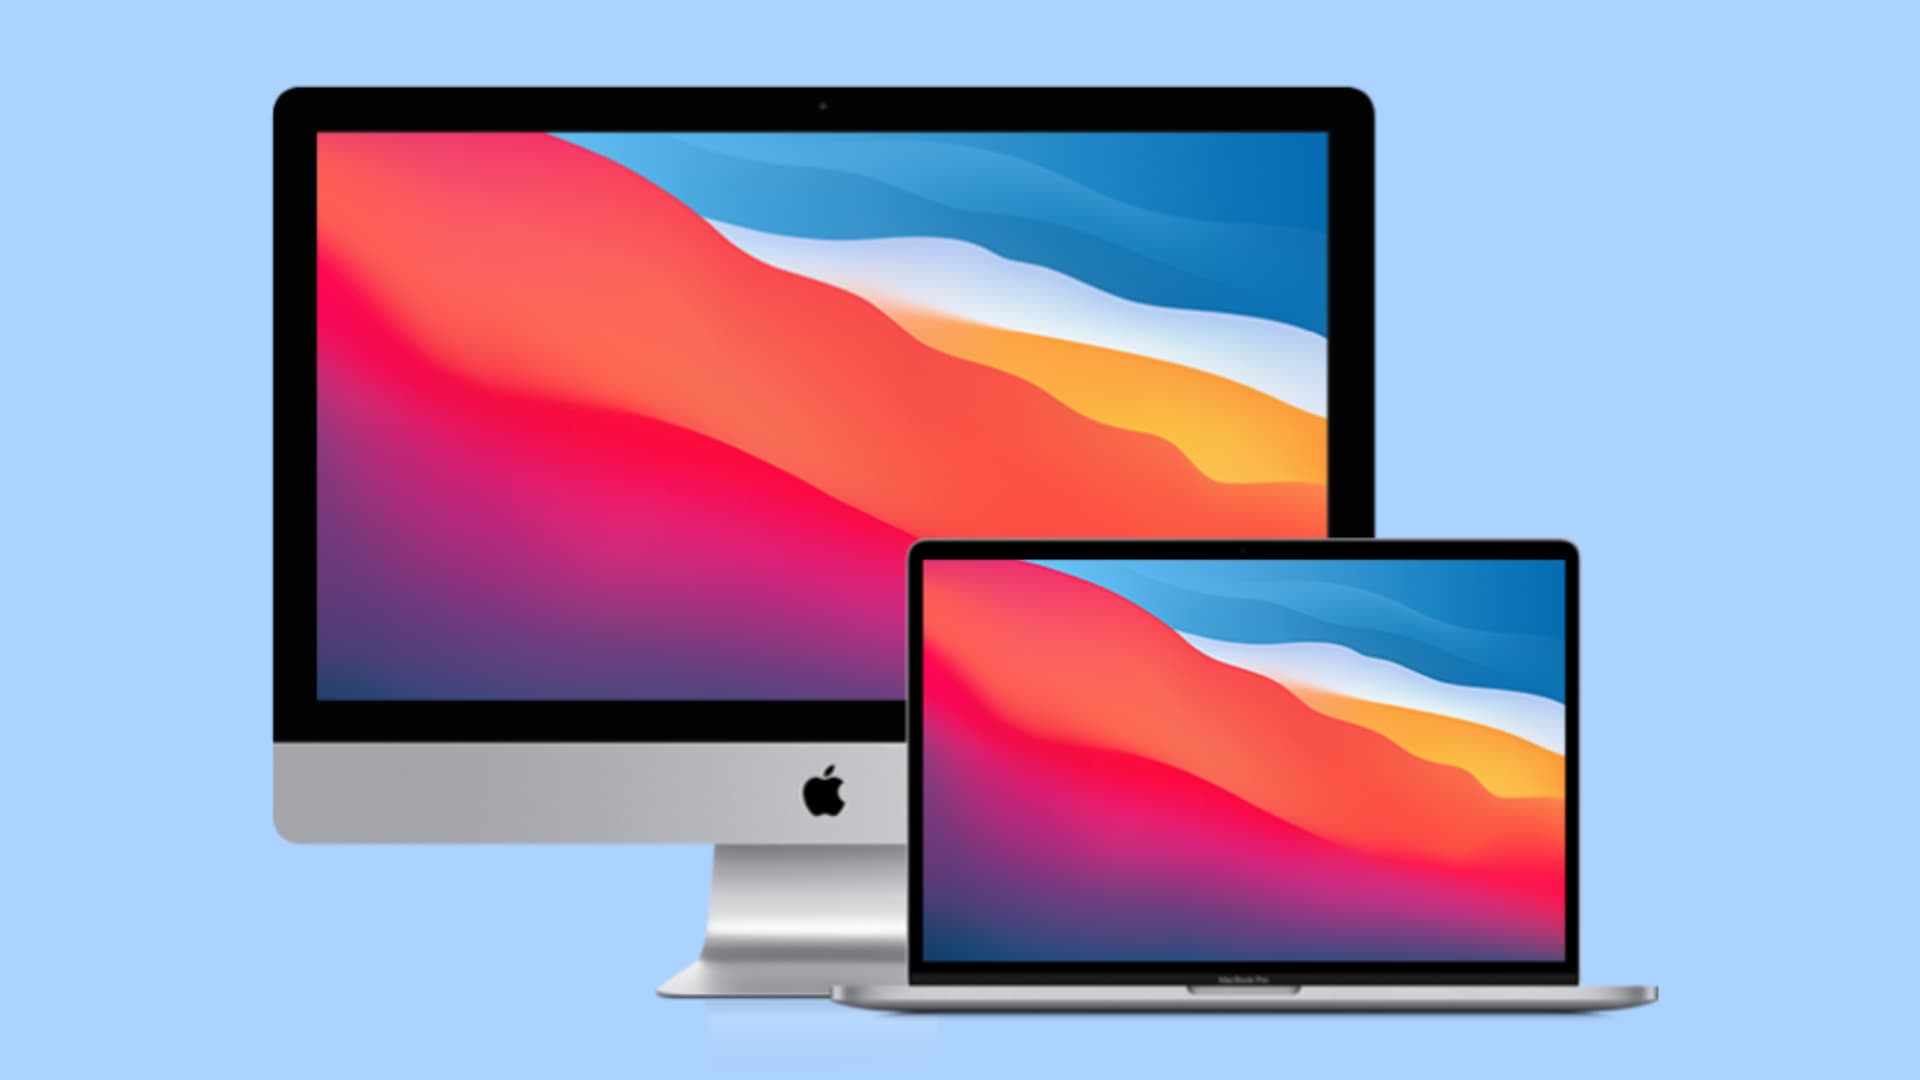 Old iMac and MacBook with red, orange, and blue wallpaper